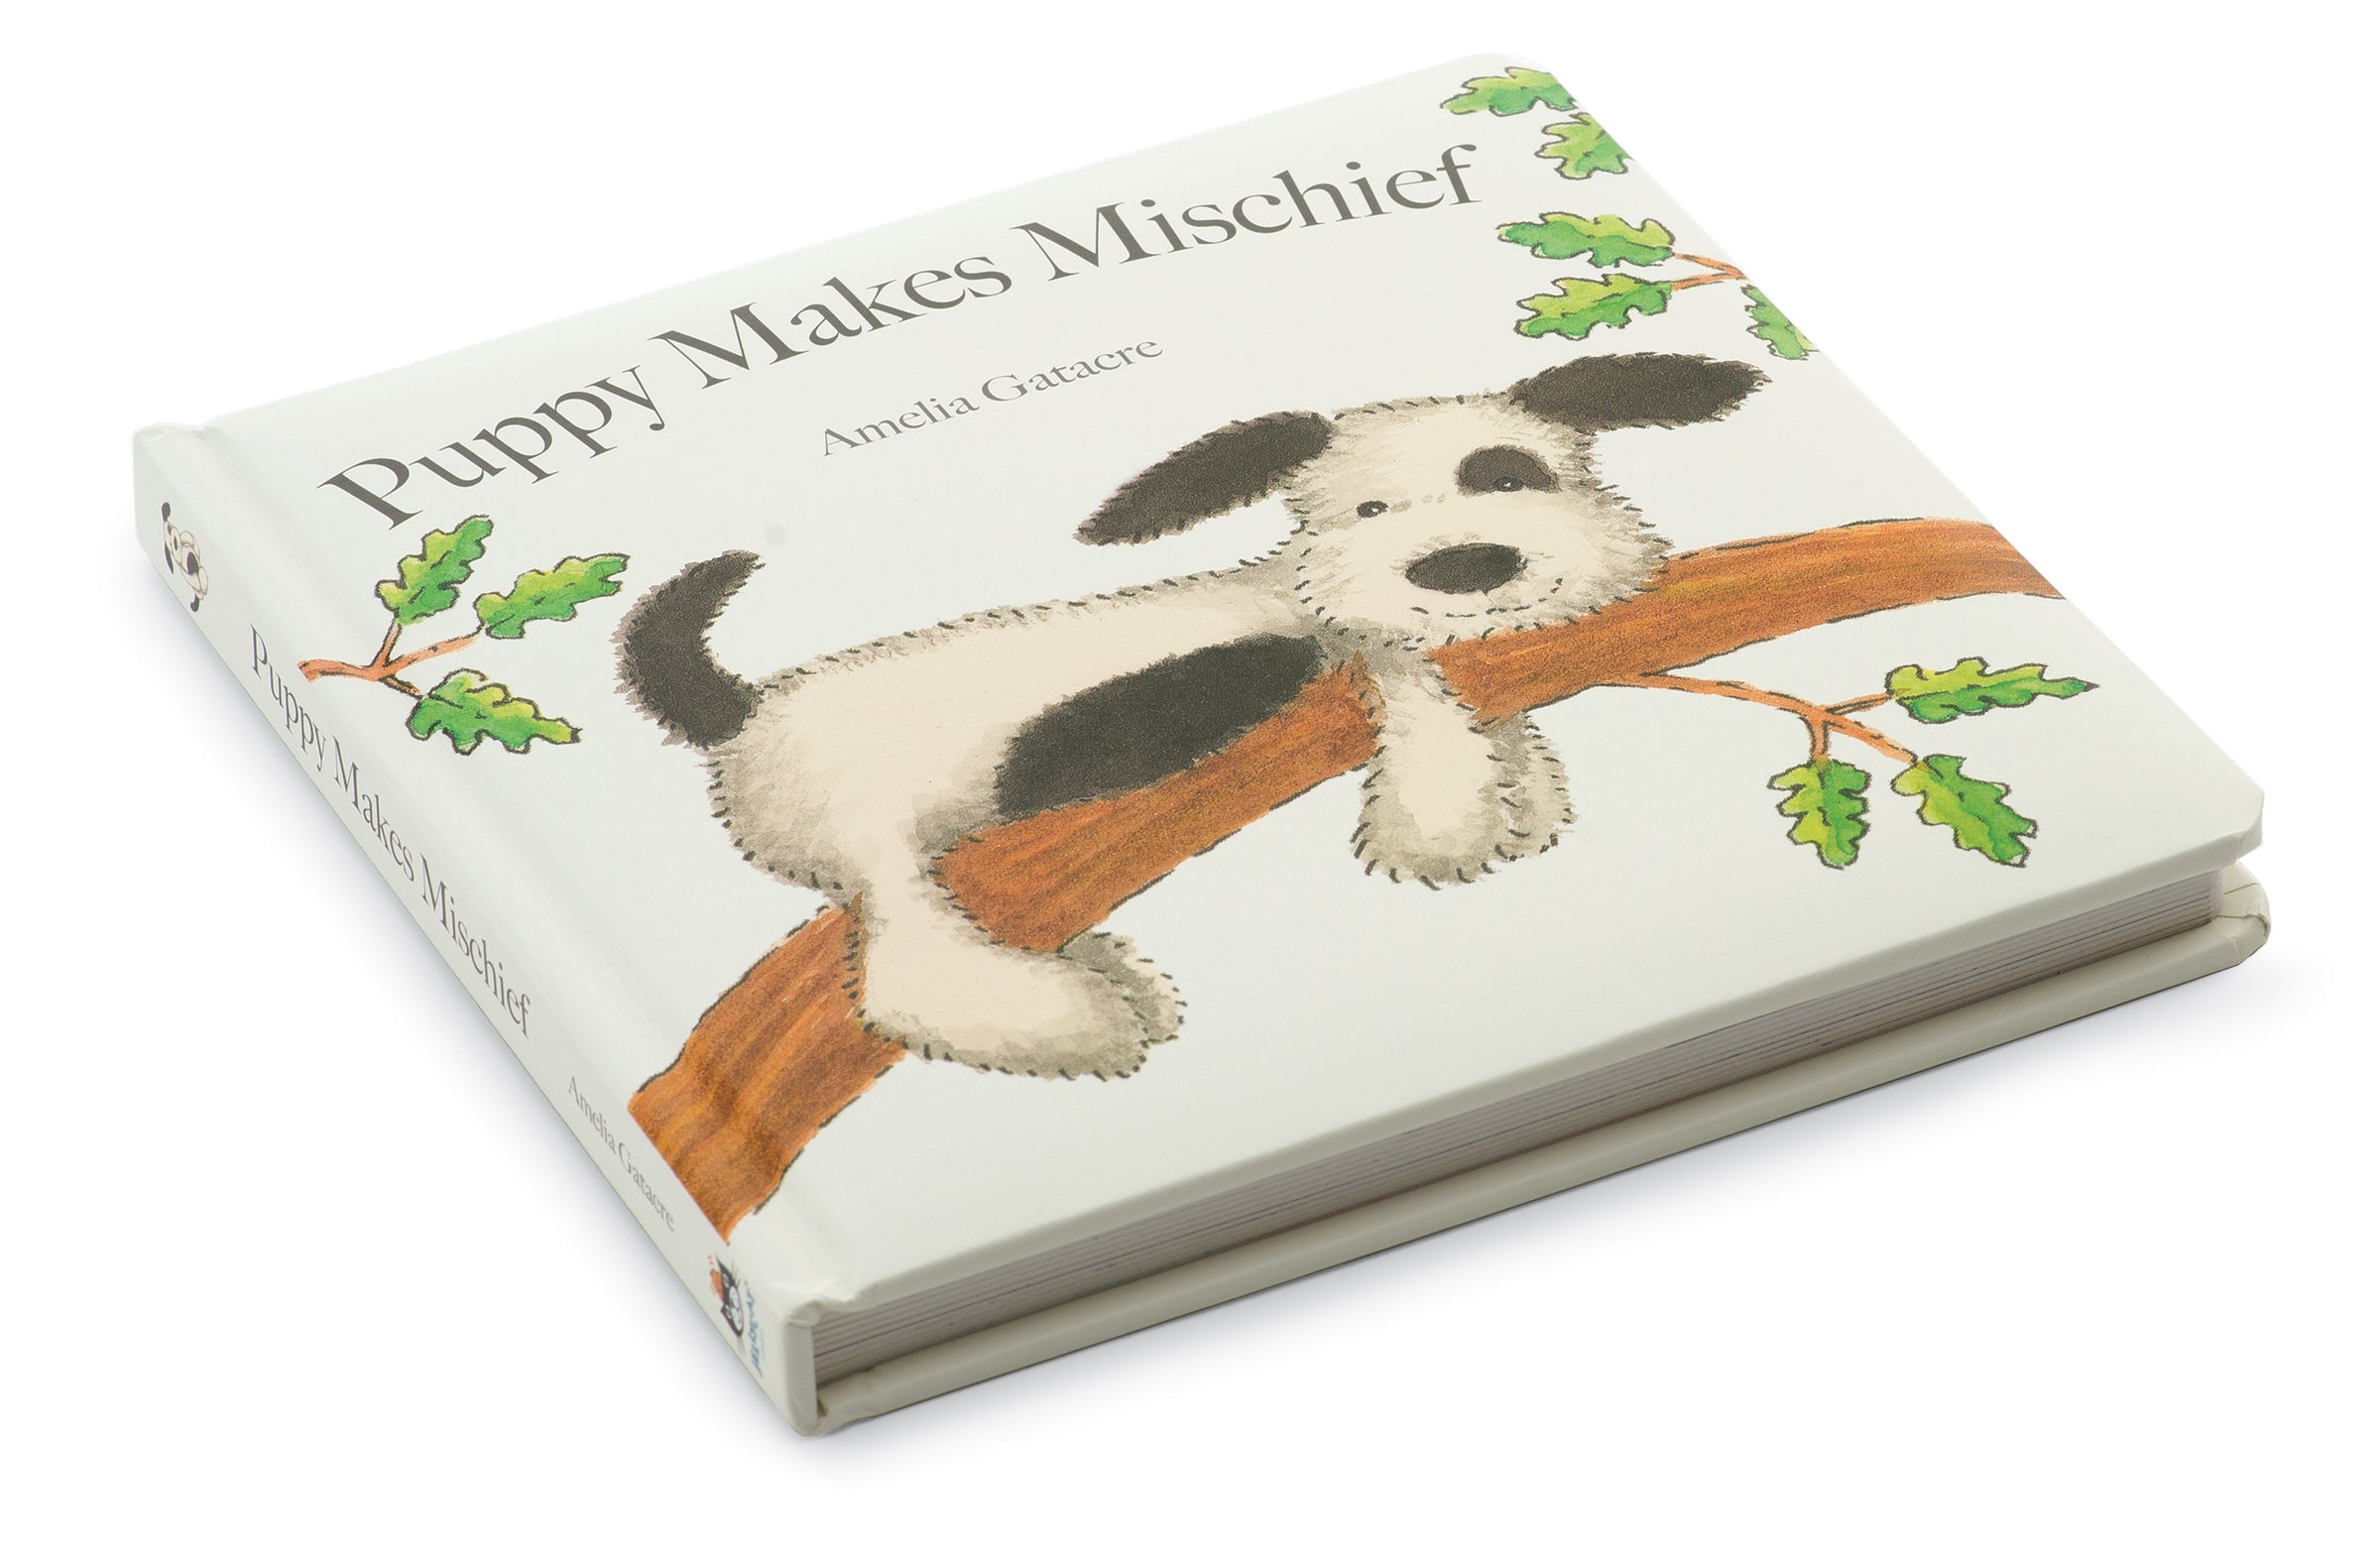 PUPPY MAKES MISCHIEF BOOK by JELLYCAT